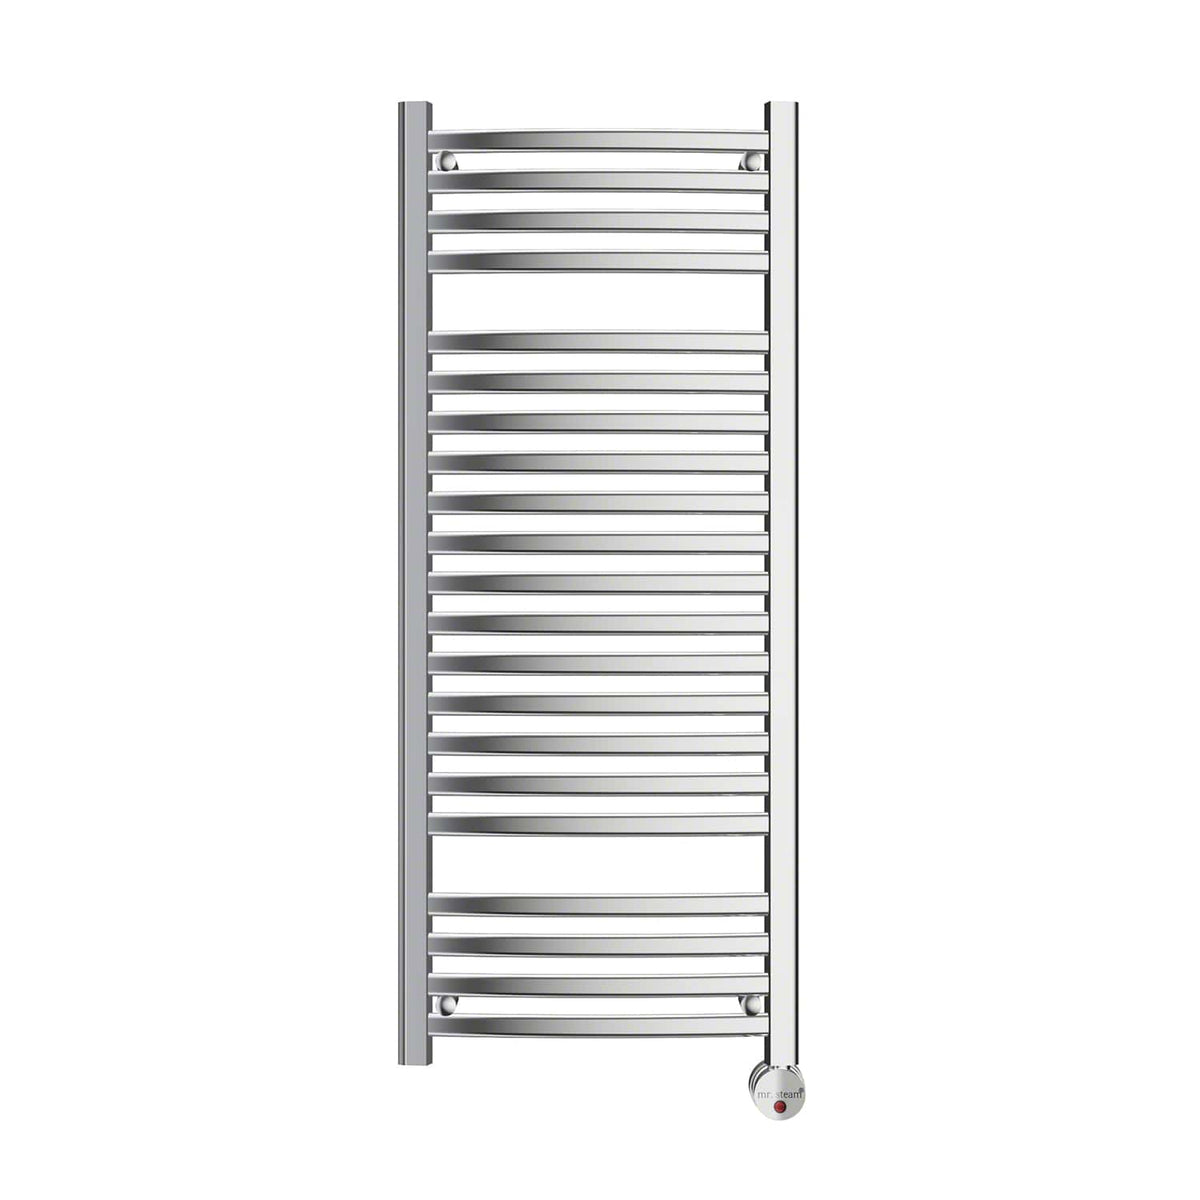 Mr. Steam Broadway Collection® 21-Bar Wall-Mounted Electric Towel Warmer with Digital Timer in Polished Chrome